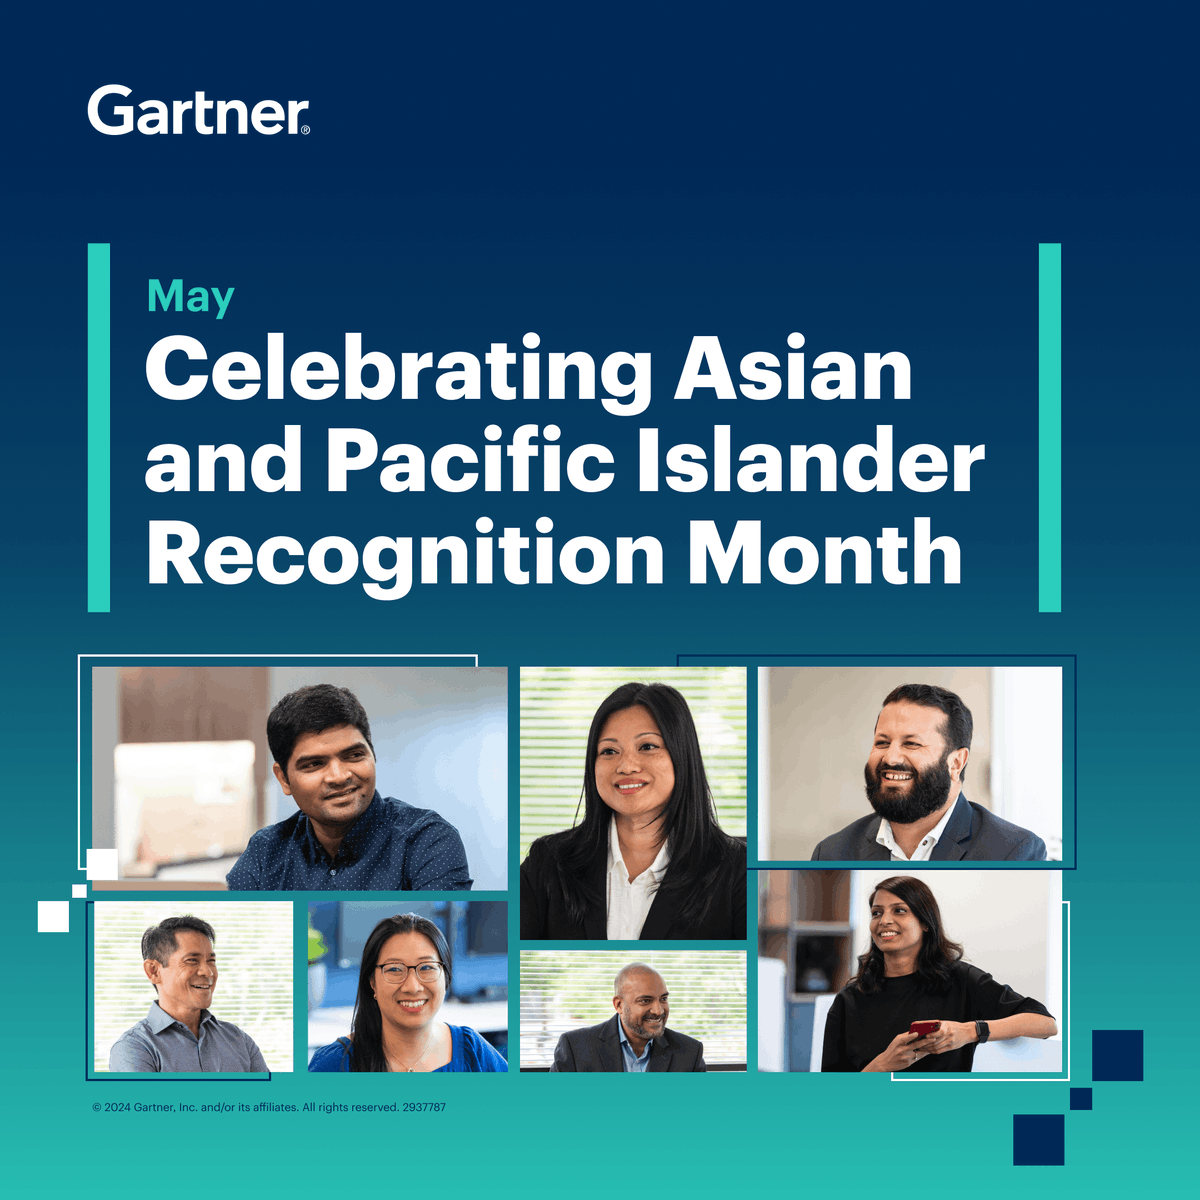 Each May, we recognize Asian and Pacific Islander Recognition Month at Gartner. 

Throughout the month, we celebrate the culture, traditions and history of our Asian and Pacific Islander associates around the world. Learn more: gtnr.it/3JFRL8v

#LifeAtGartner #Inclusion